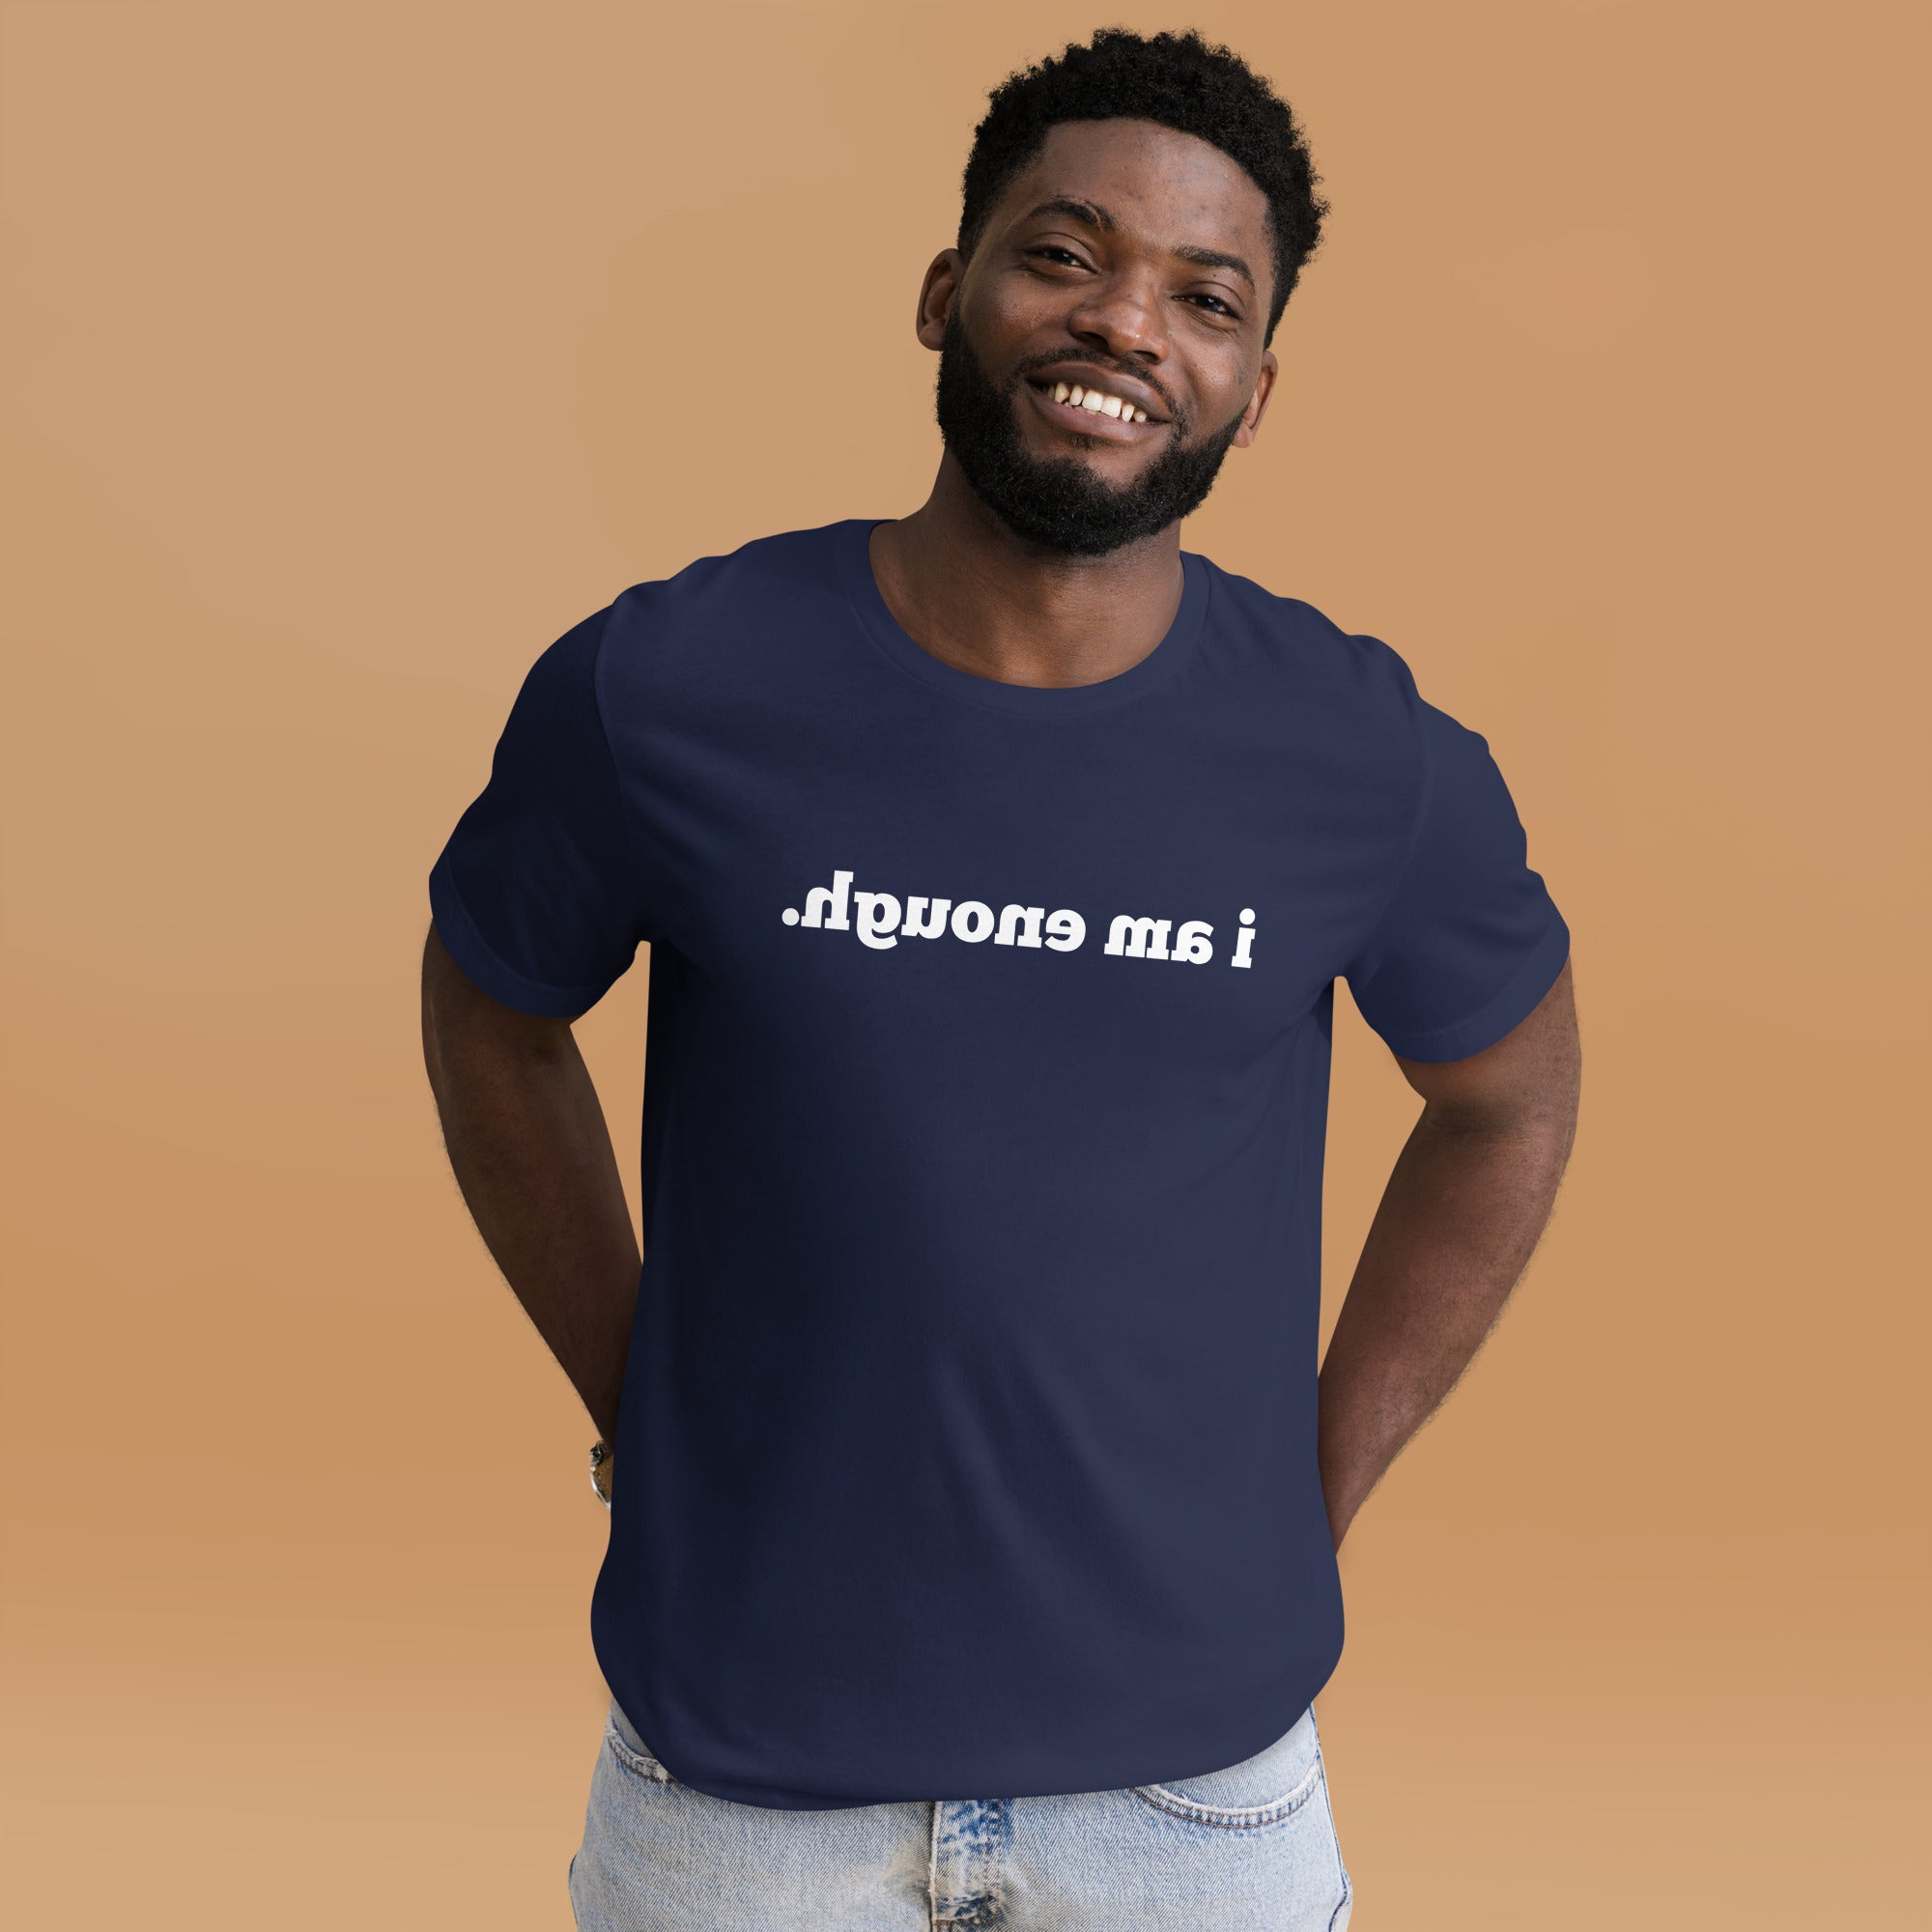 I AM ENOUGH Mirror Affirmation Tee (Unisex, 14 COLORS!)